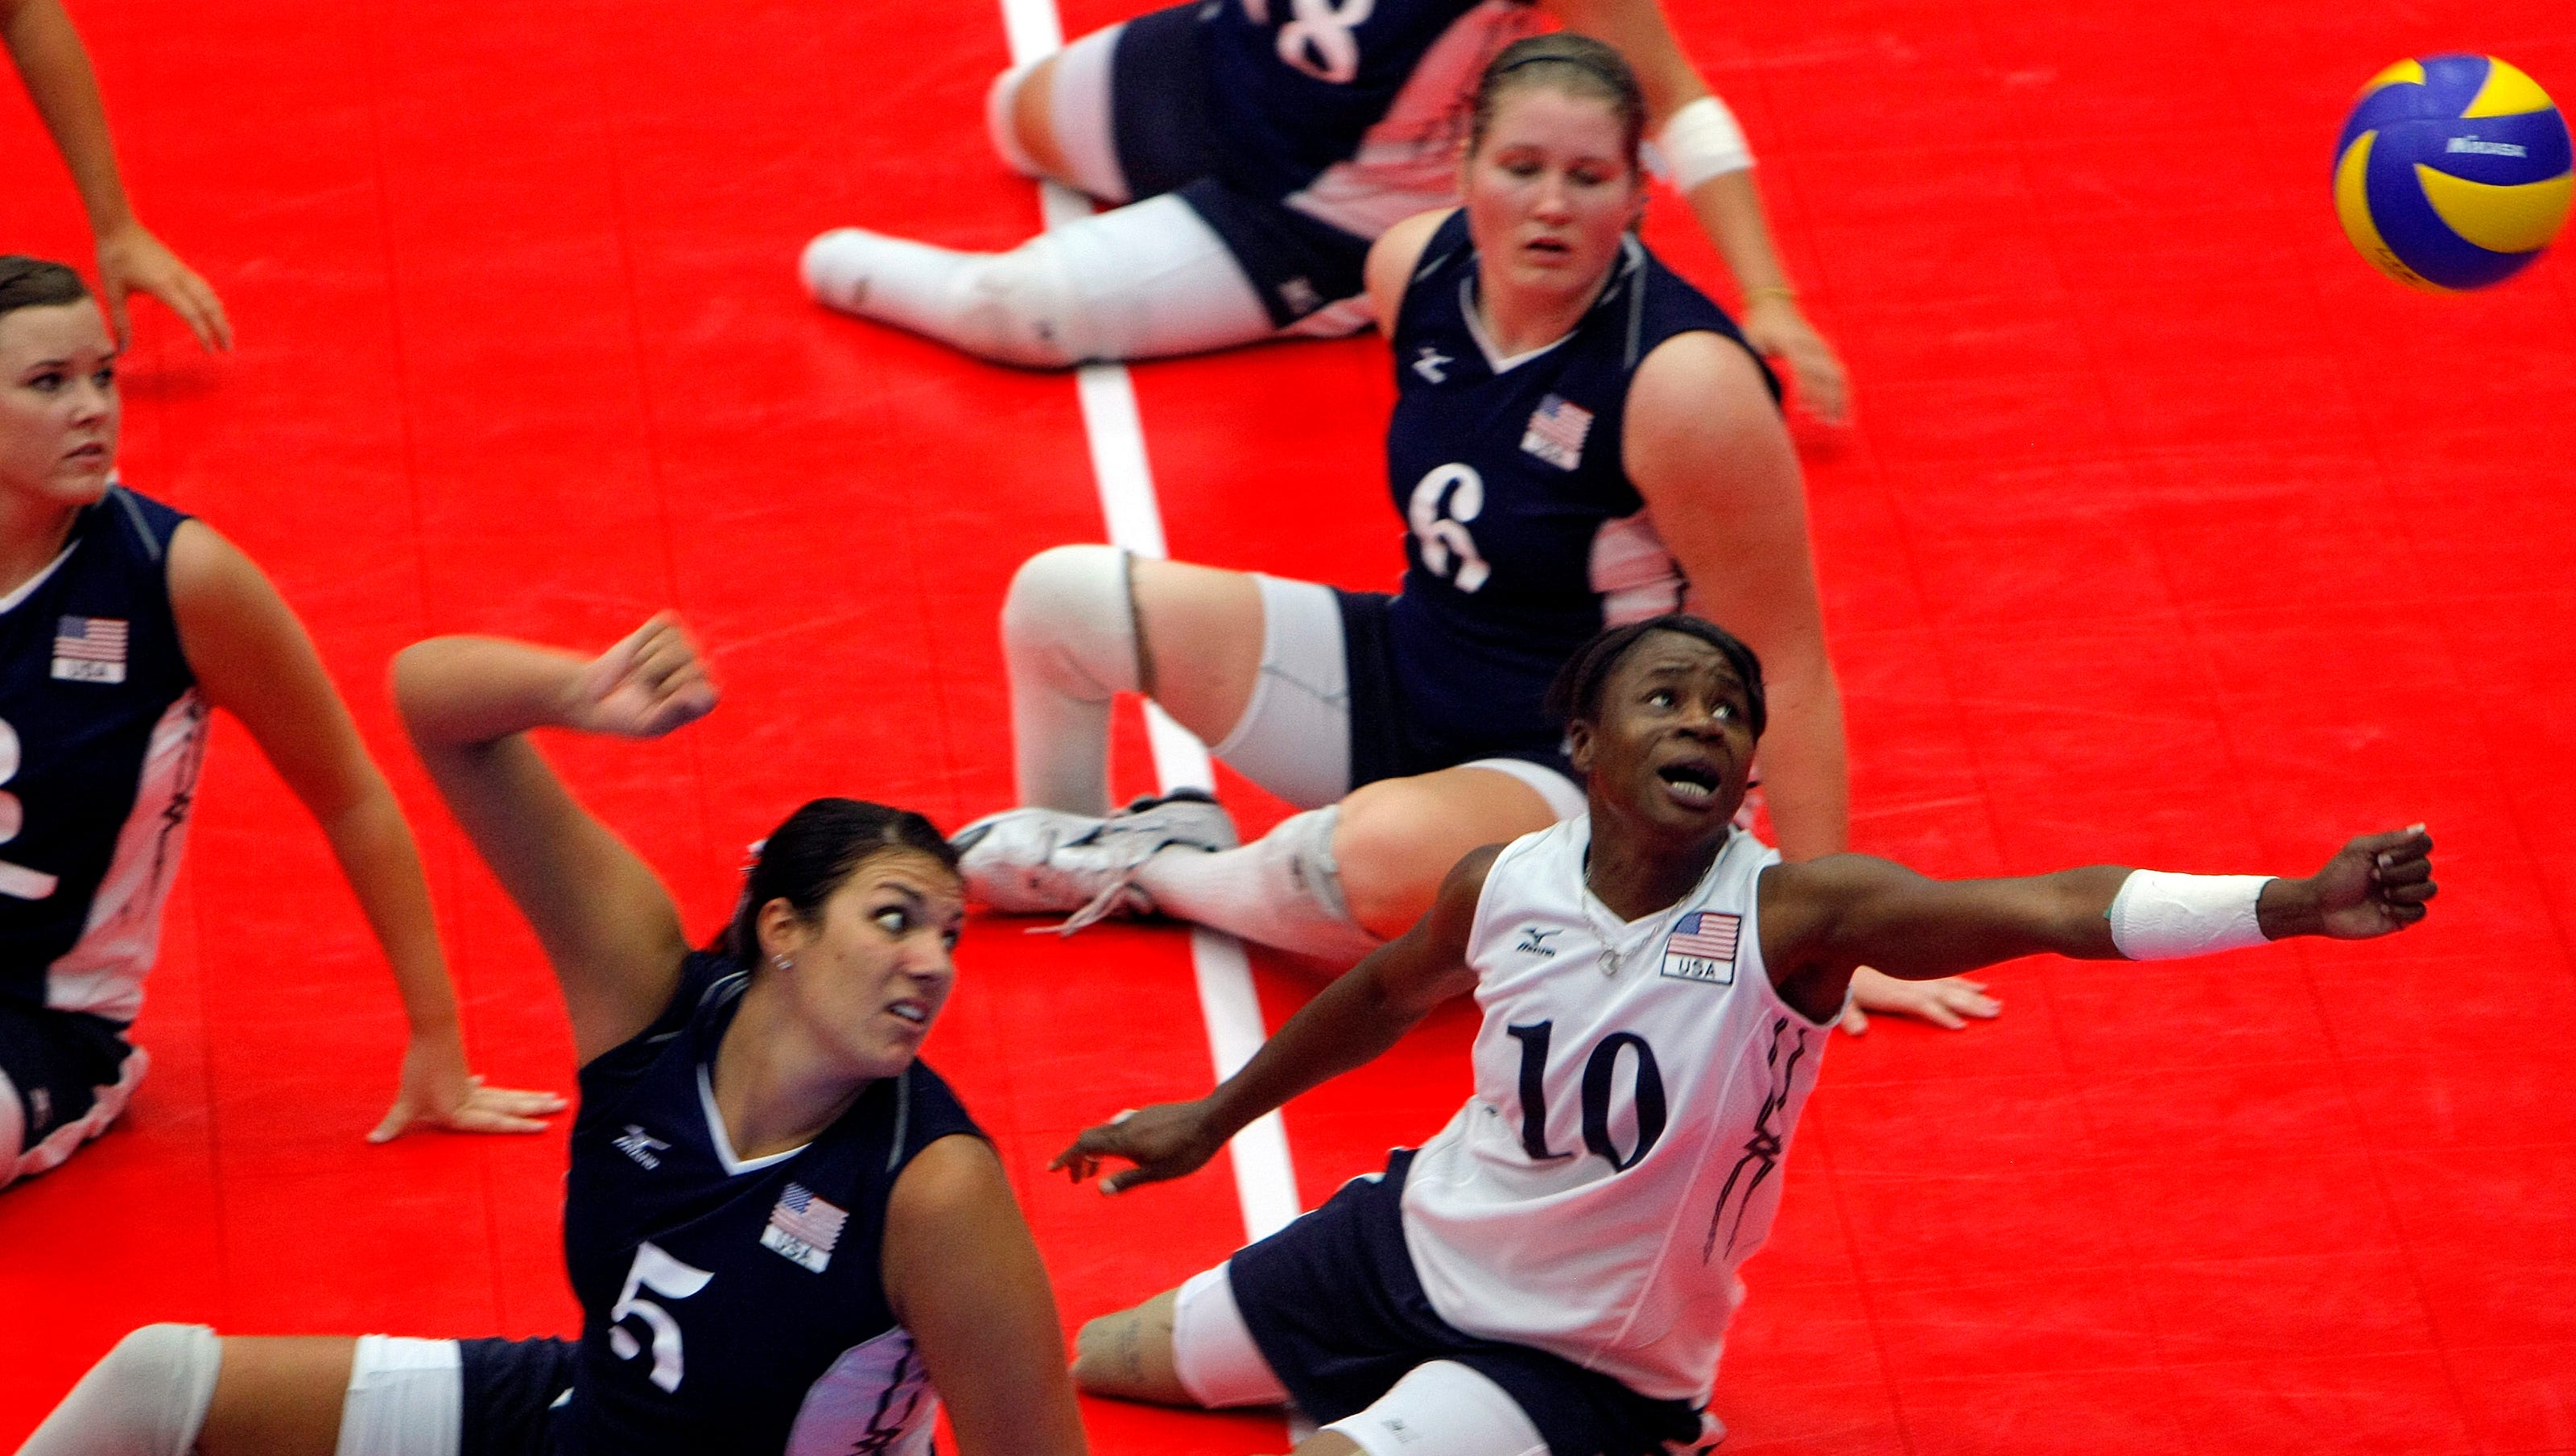 U.S. Sitting Volleyball team's Eric Duda hoping to represent country in ...